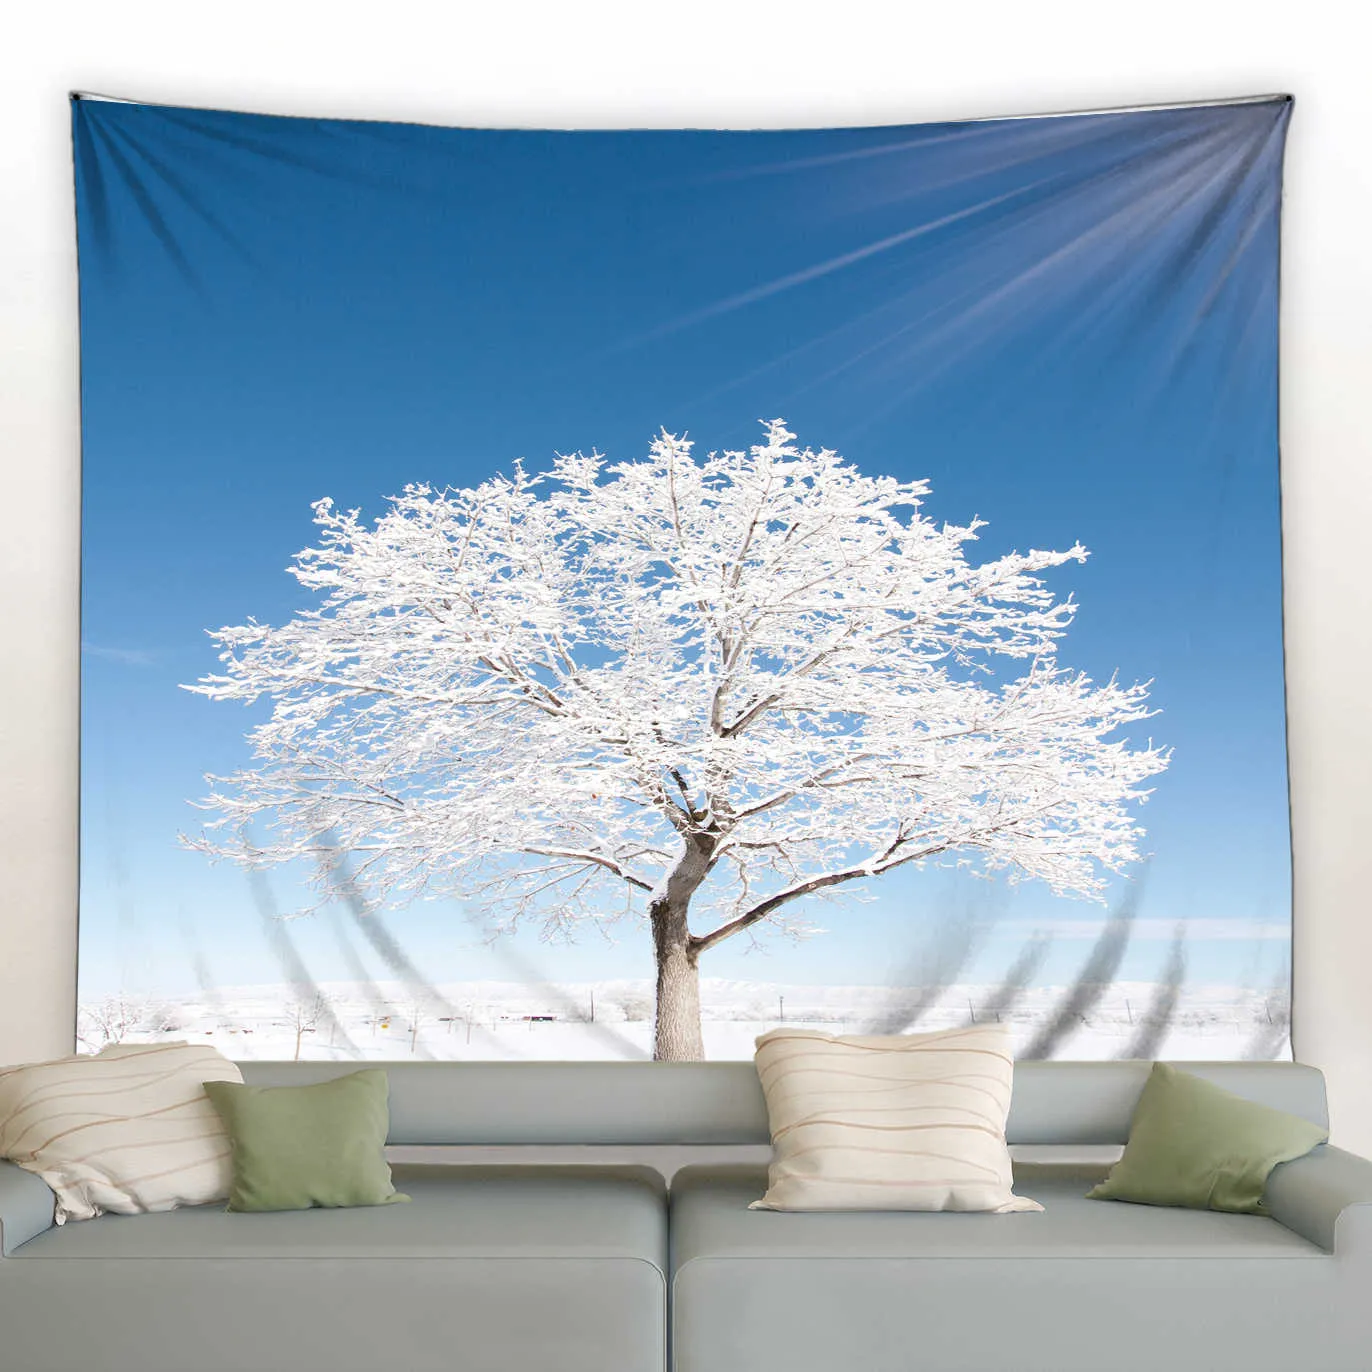 Tapestries Dome Cameras Landscape Printing Tapestry Elk Forest Wall Hanging Large Tapestry Art Living Room Bedroom Background Blanket Can Be Customized R230714